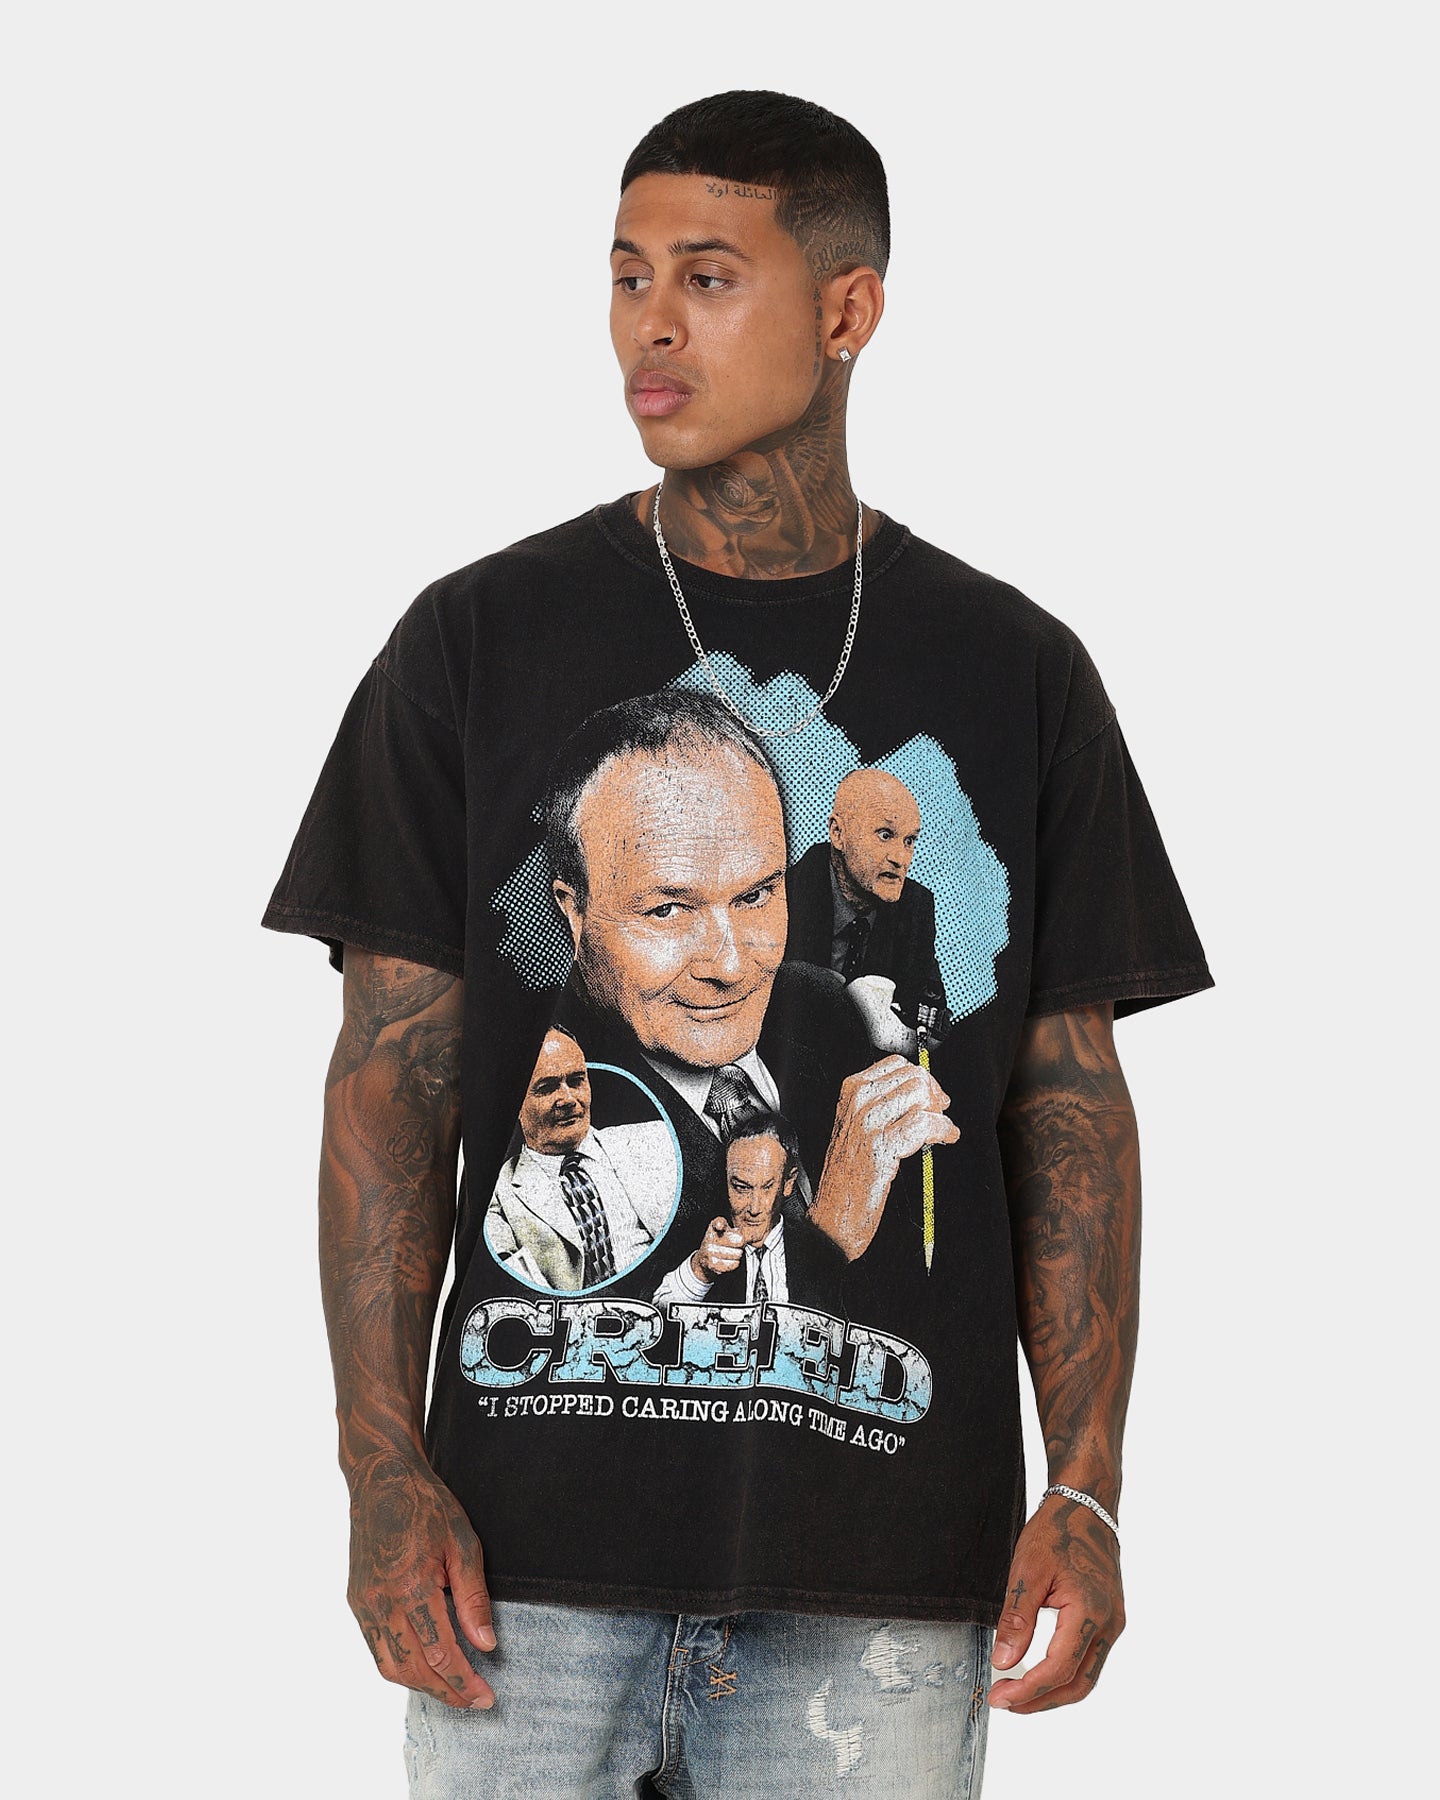 American Thrift X The Office Creed Bratton Vintage T-Shirt